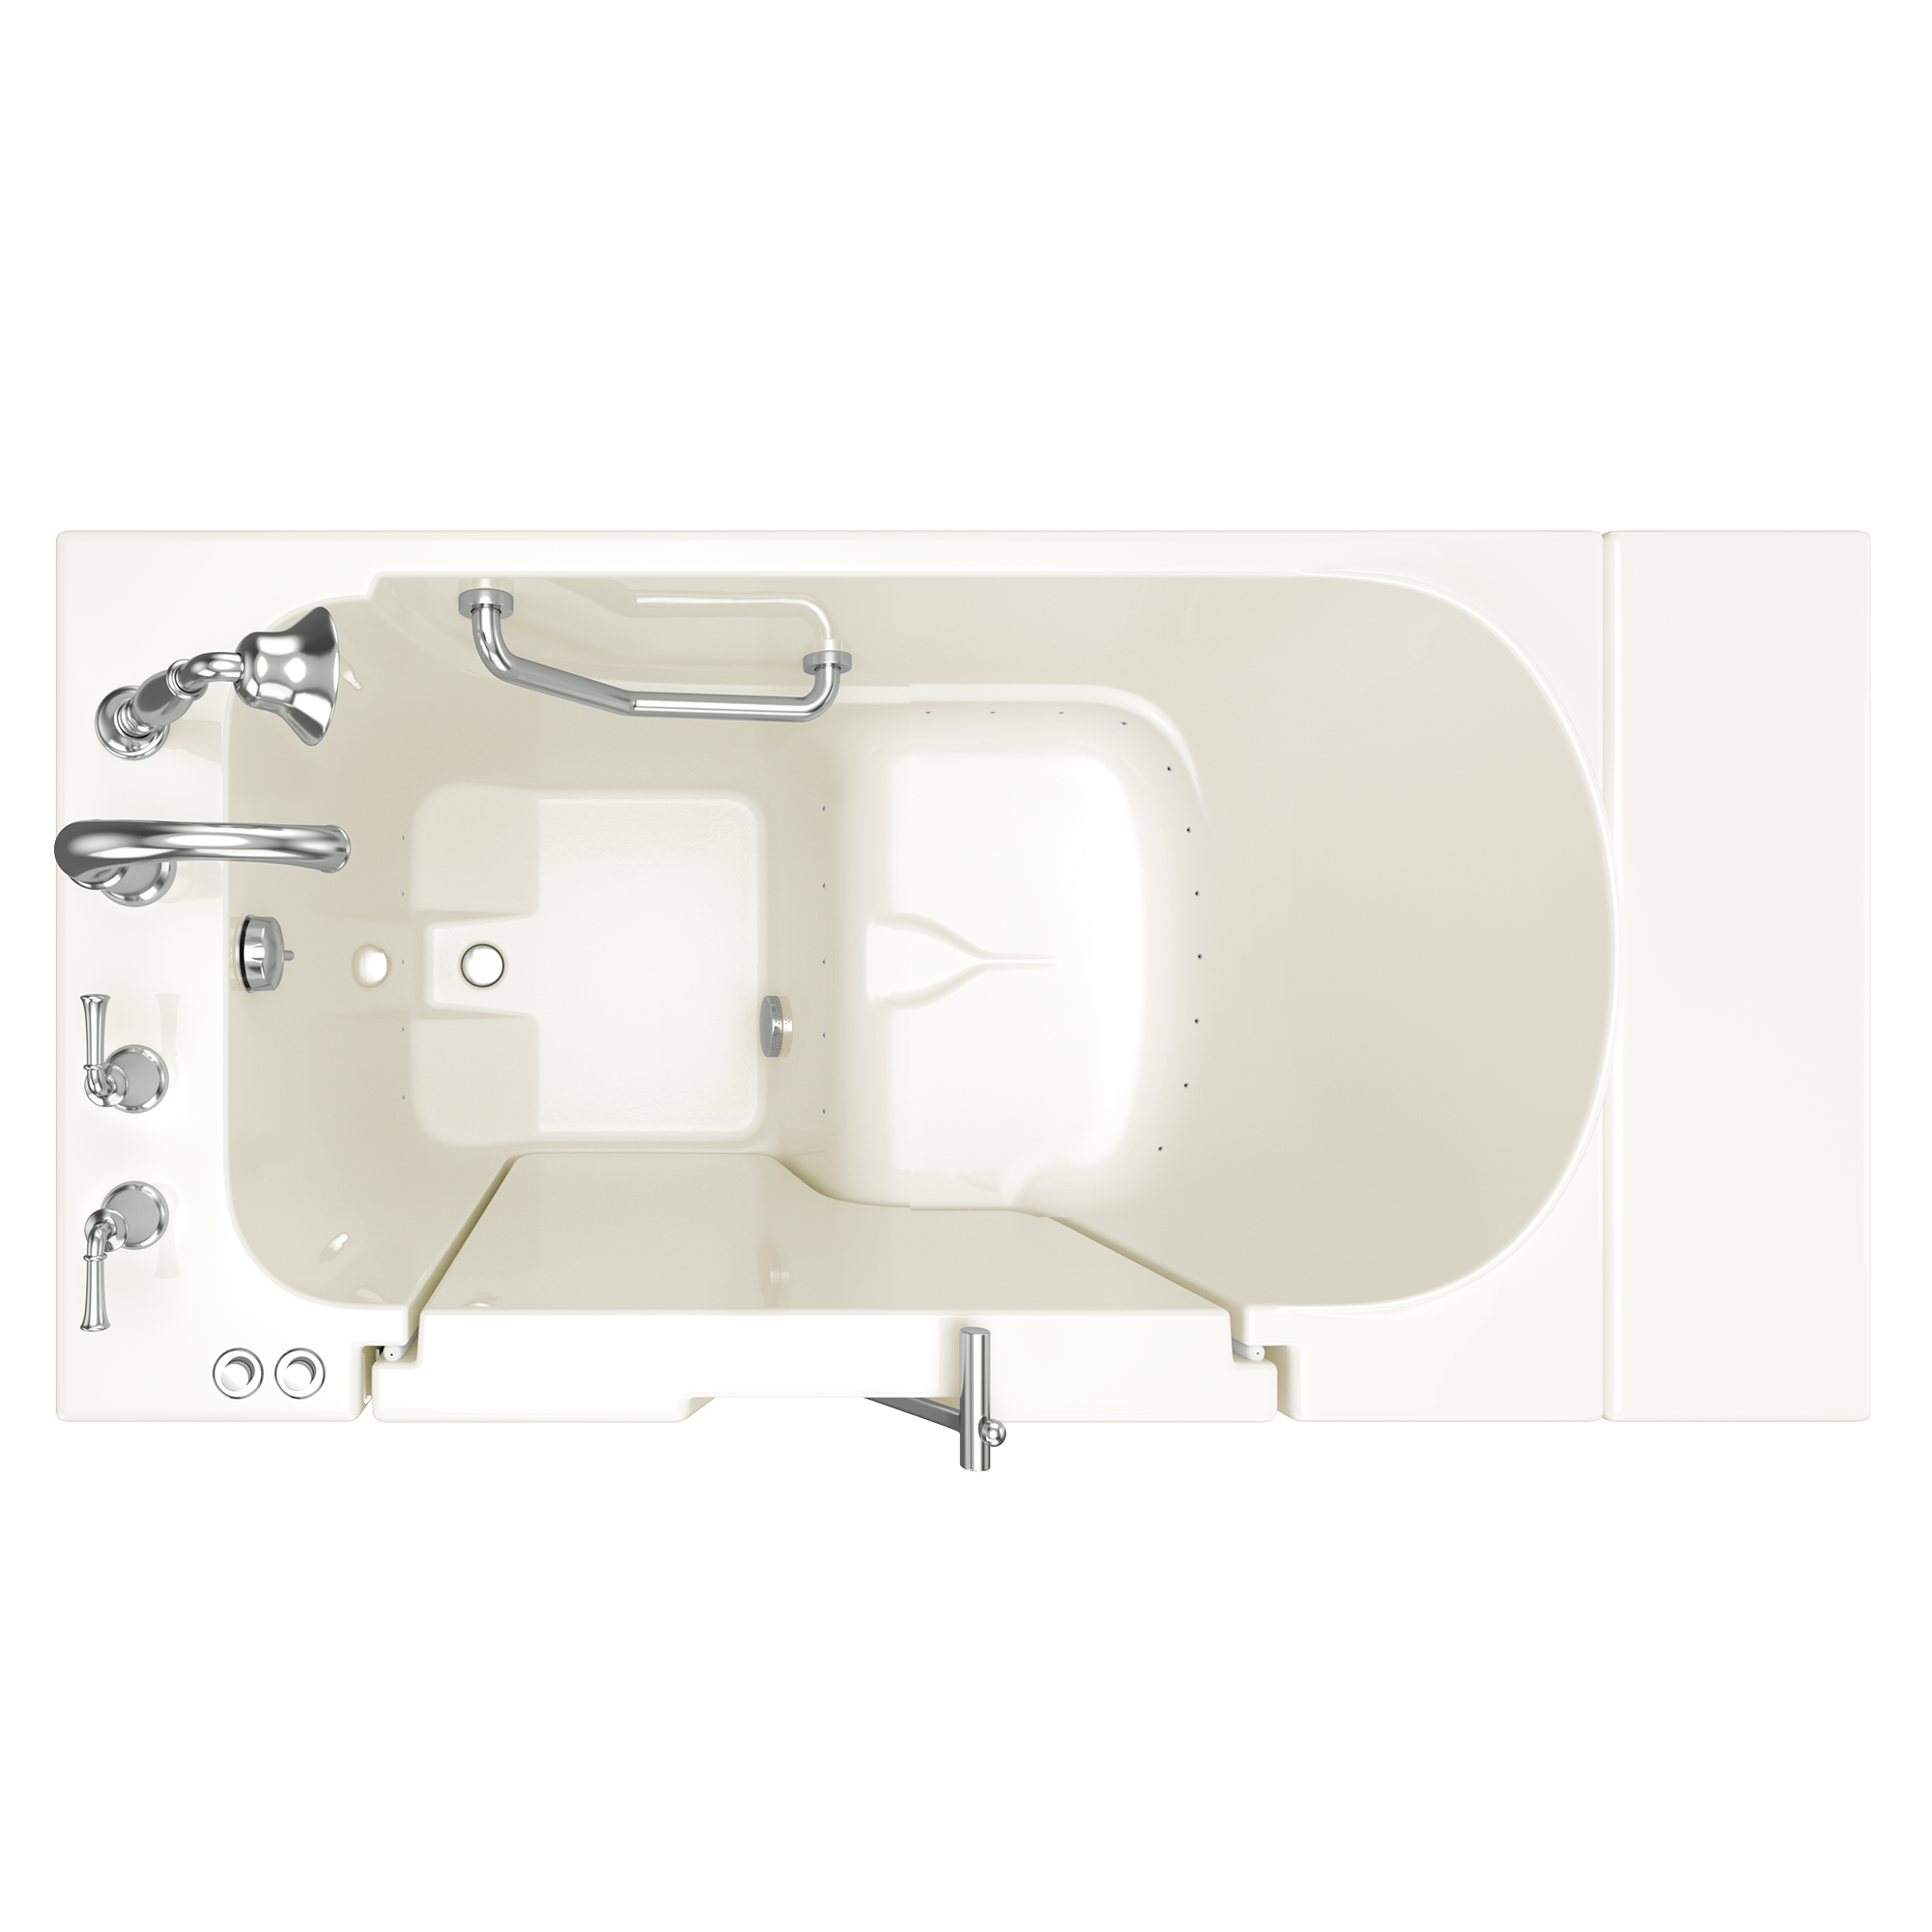 Gelcoat Value Series 30 x 52  Inch Walk in Tub With Air Spa System   Left Hand Drain With Faucet WIB LINEN